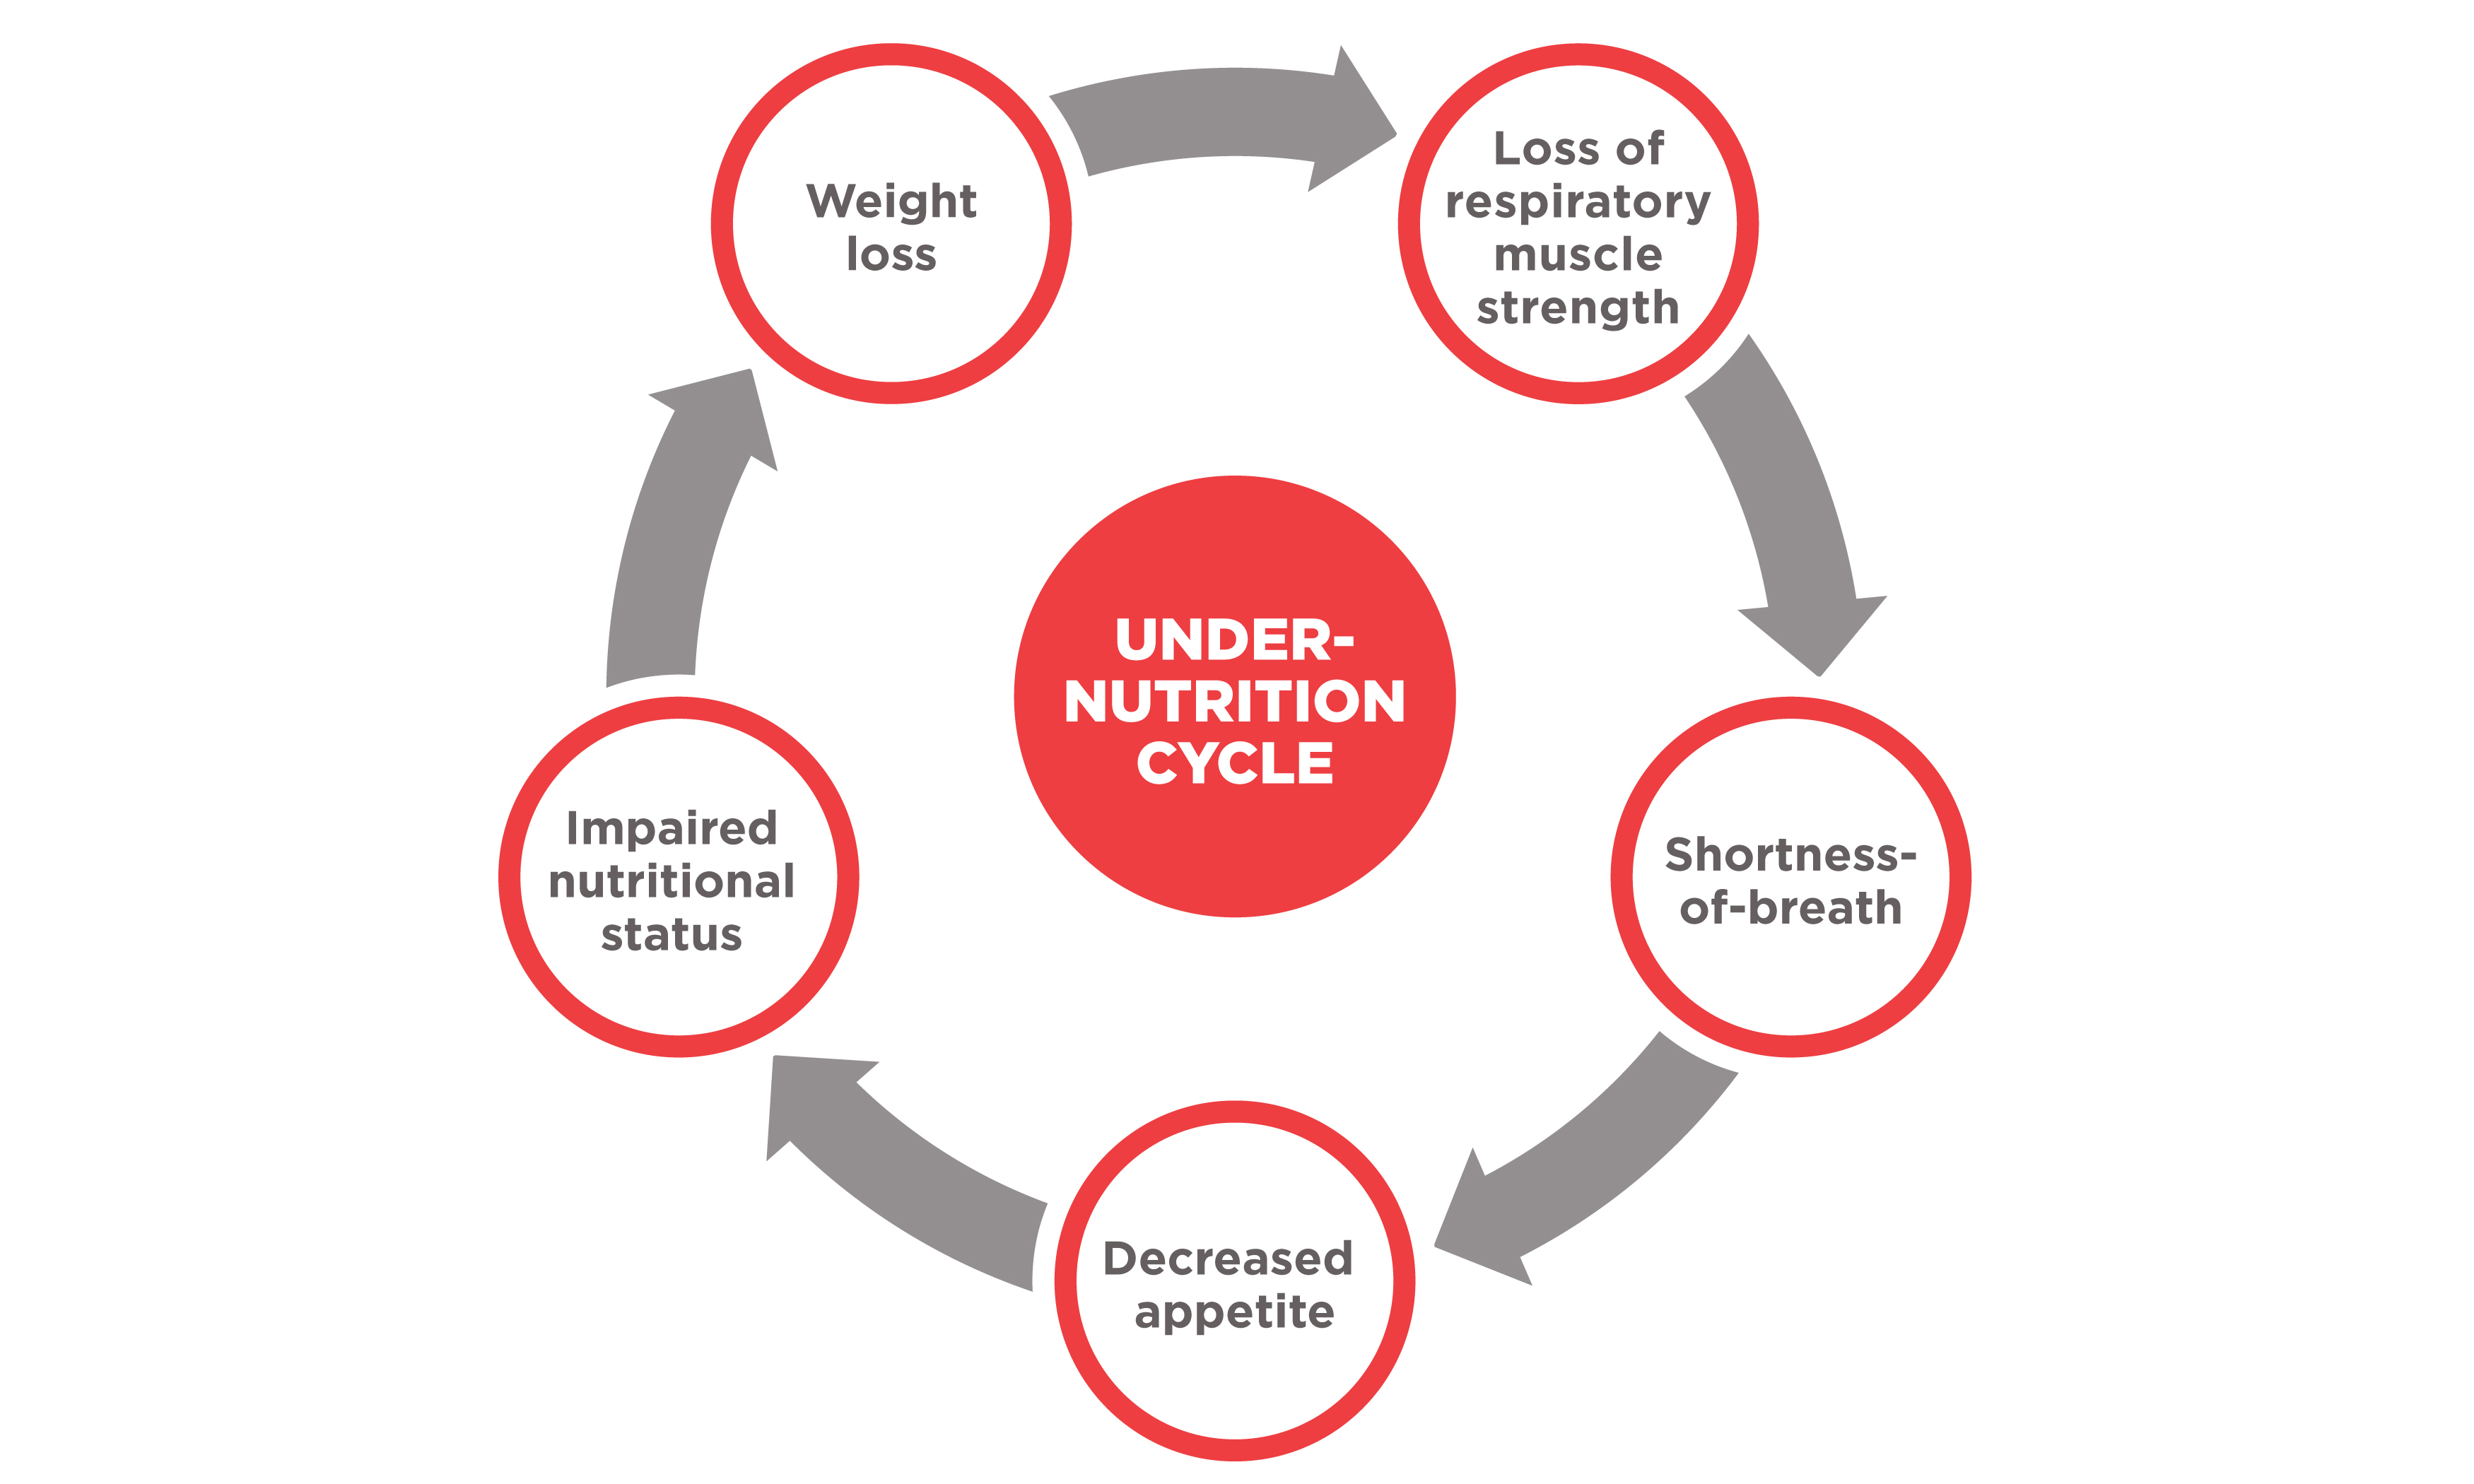 Undernutrition cycle